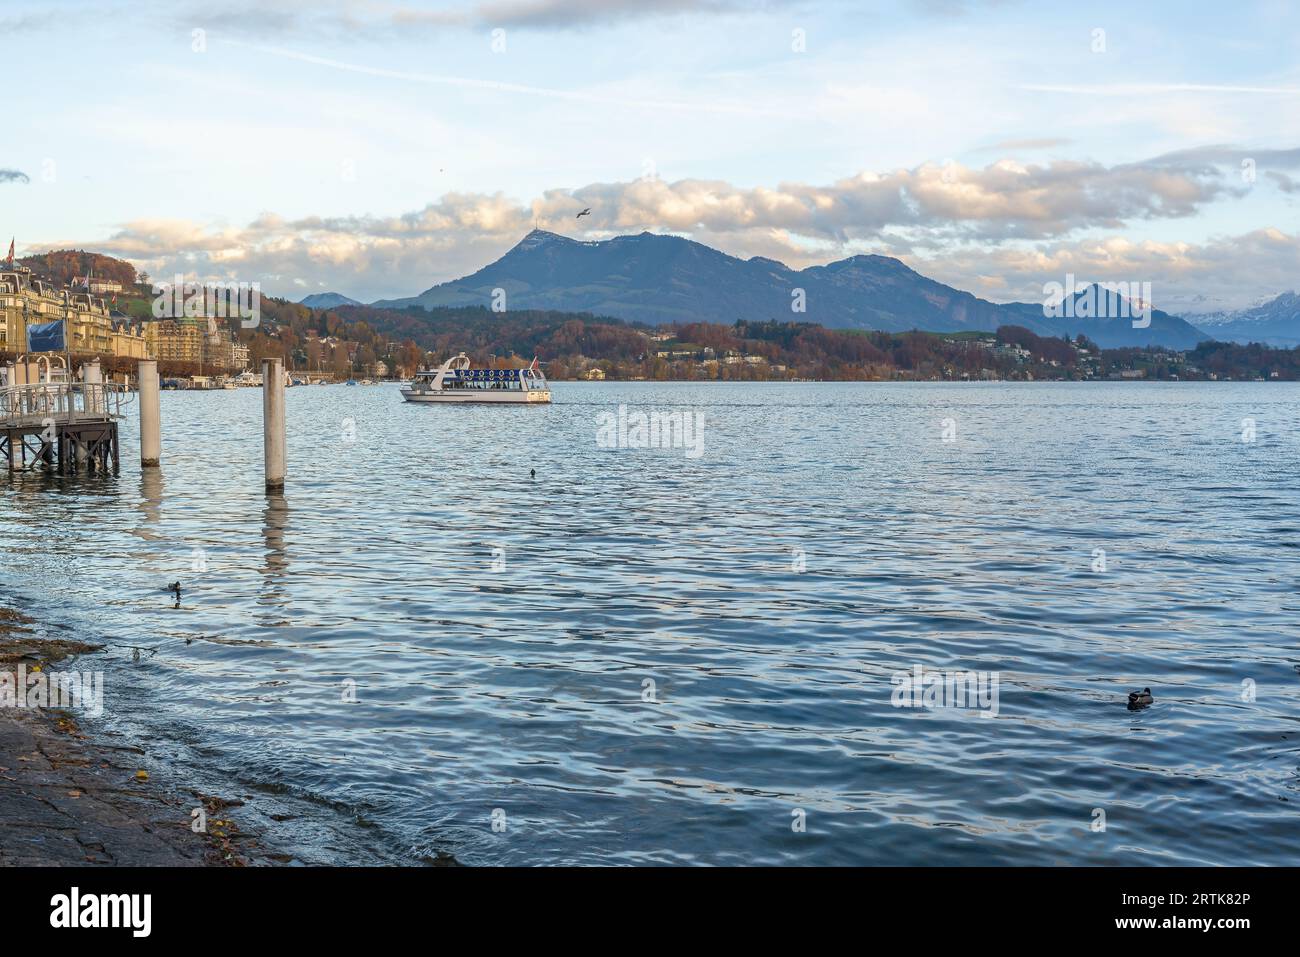 Swiss Alps and Mount Rigi view with Lake Lucerne - Lucerne, Switzerland Stock Photo